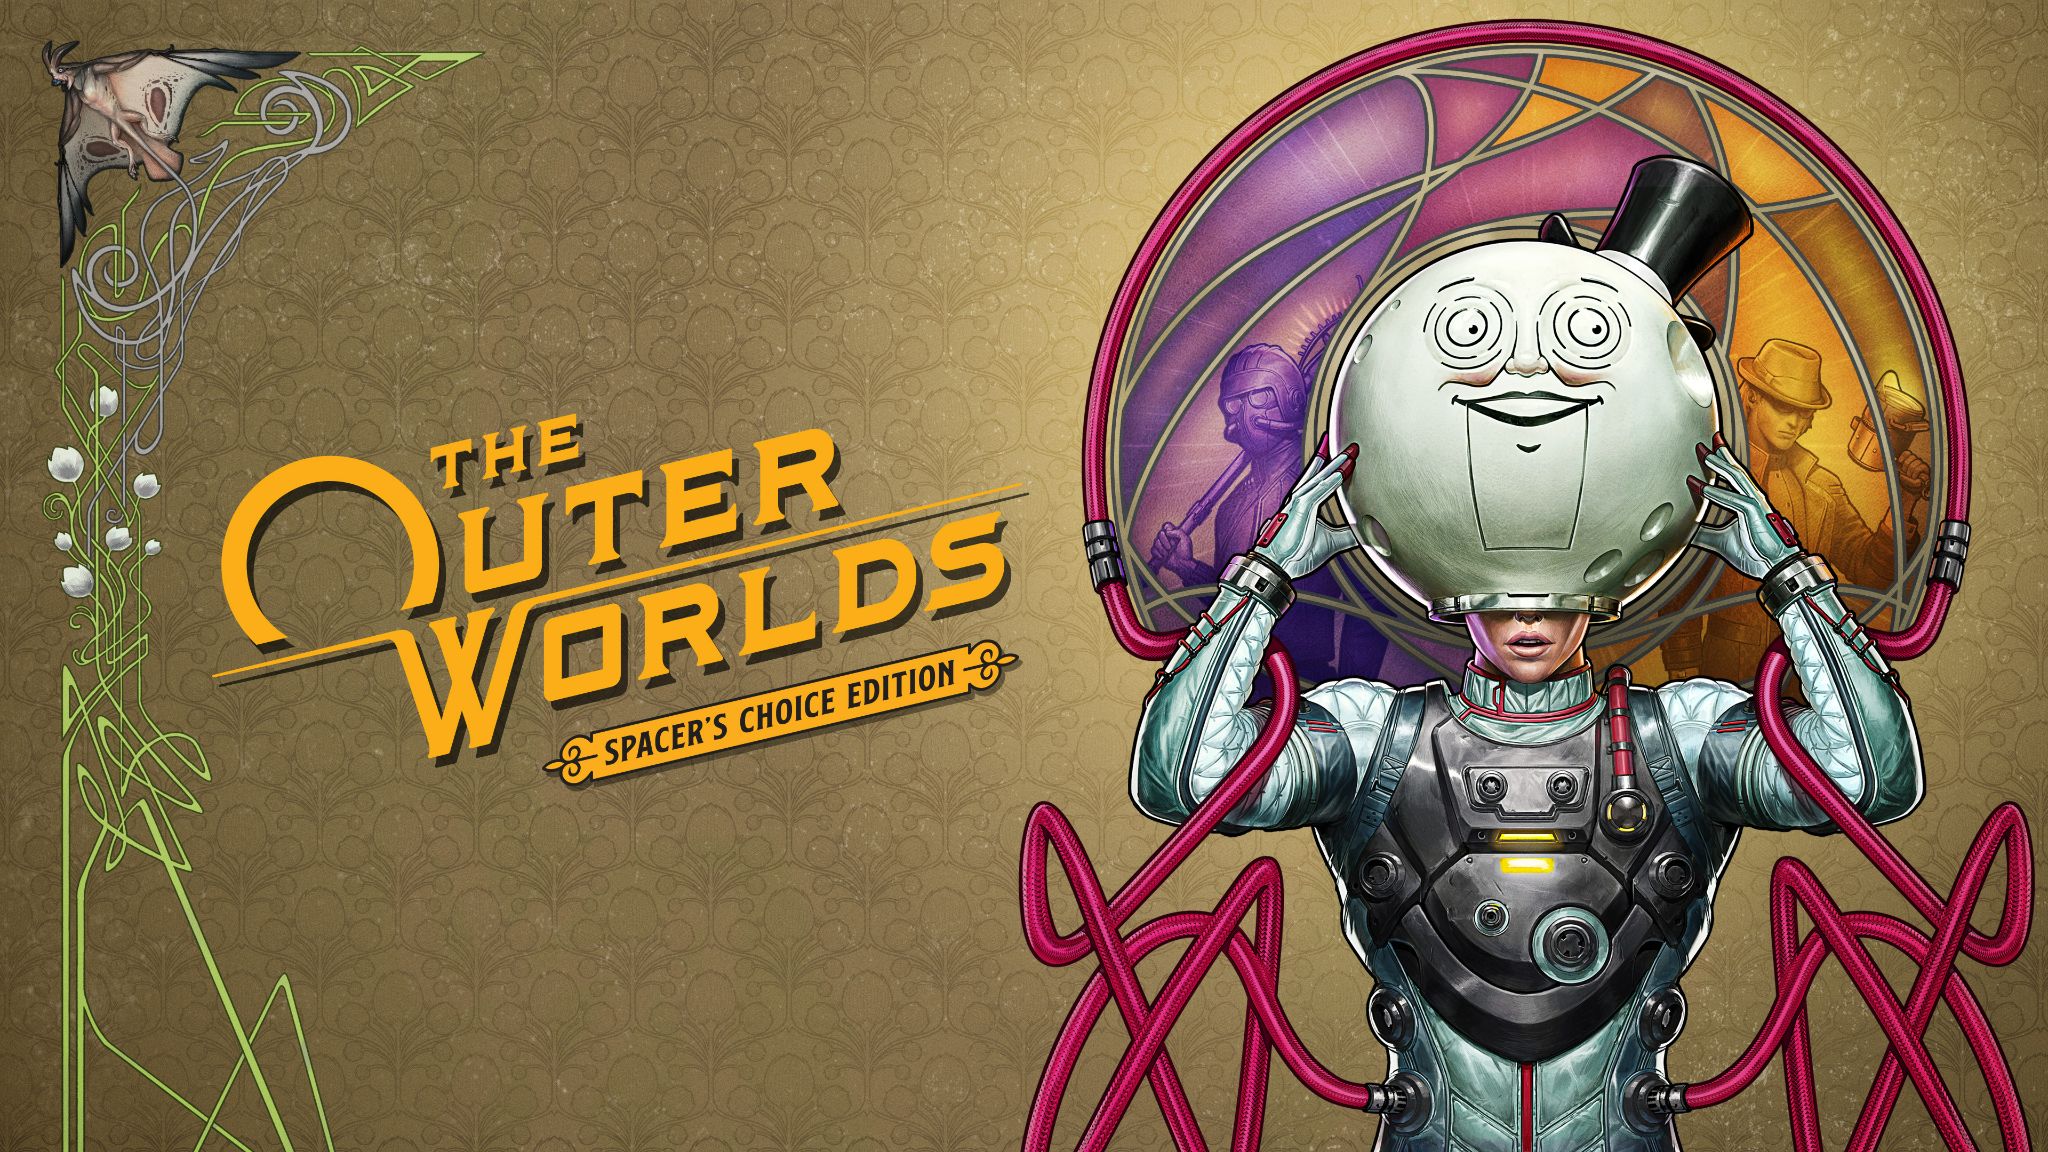 The Outer Worlds: Spacer's Choice Edition launches in March